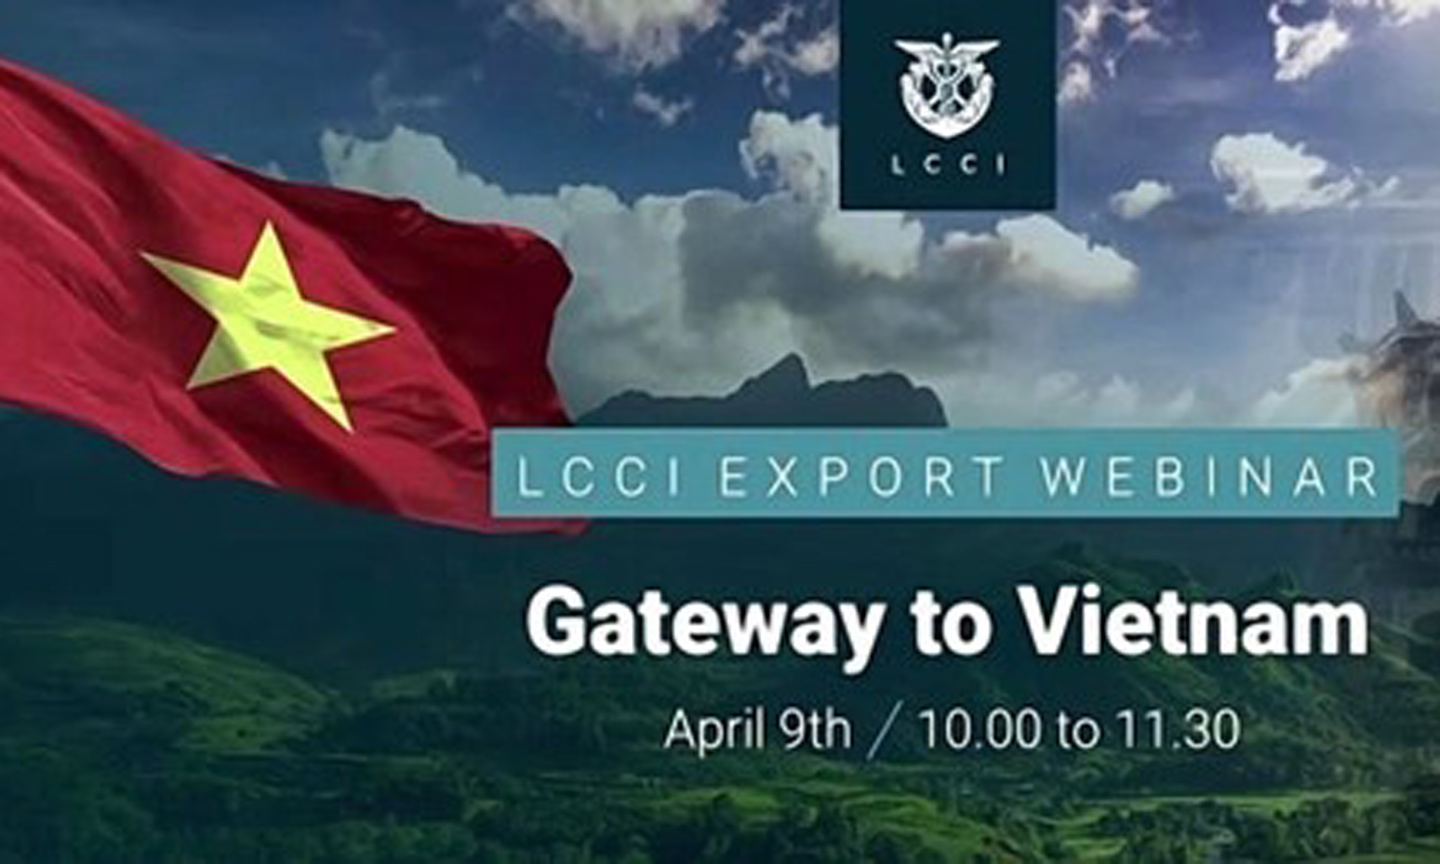 ABO/NDO- Trade between Vietnam and Latvia reached 311.73 million USD in 2023, an increase of 33% from 2020, the year the EU-Vietnam Free Trade Agreement (EVFTA) came into effect, heard a recent webinar titled “Gateway to Vietnam”.